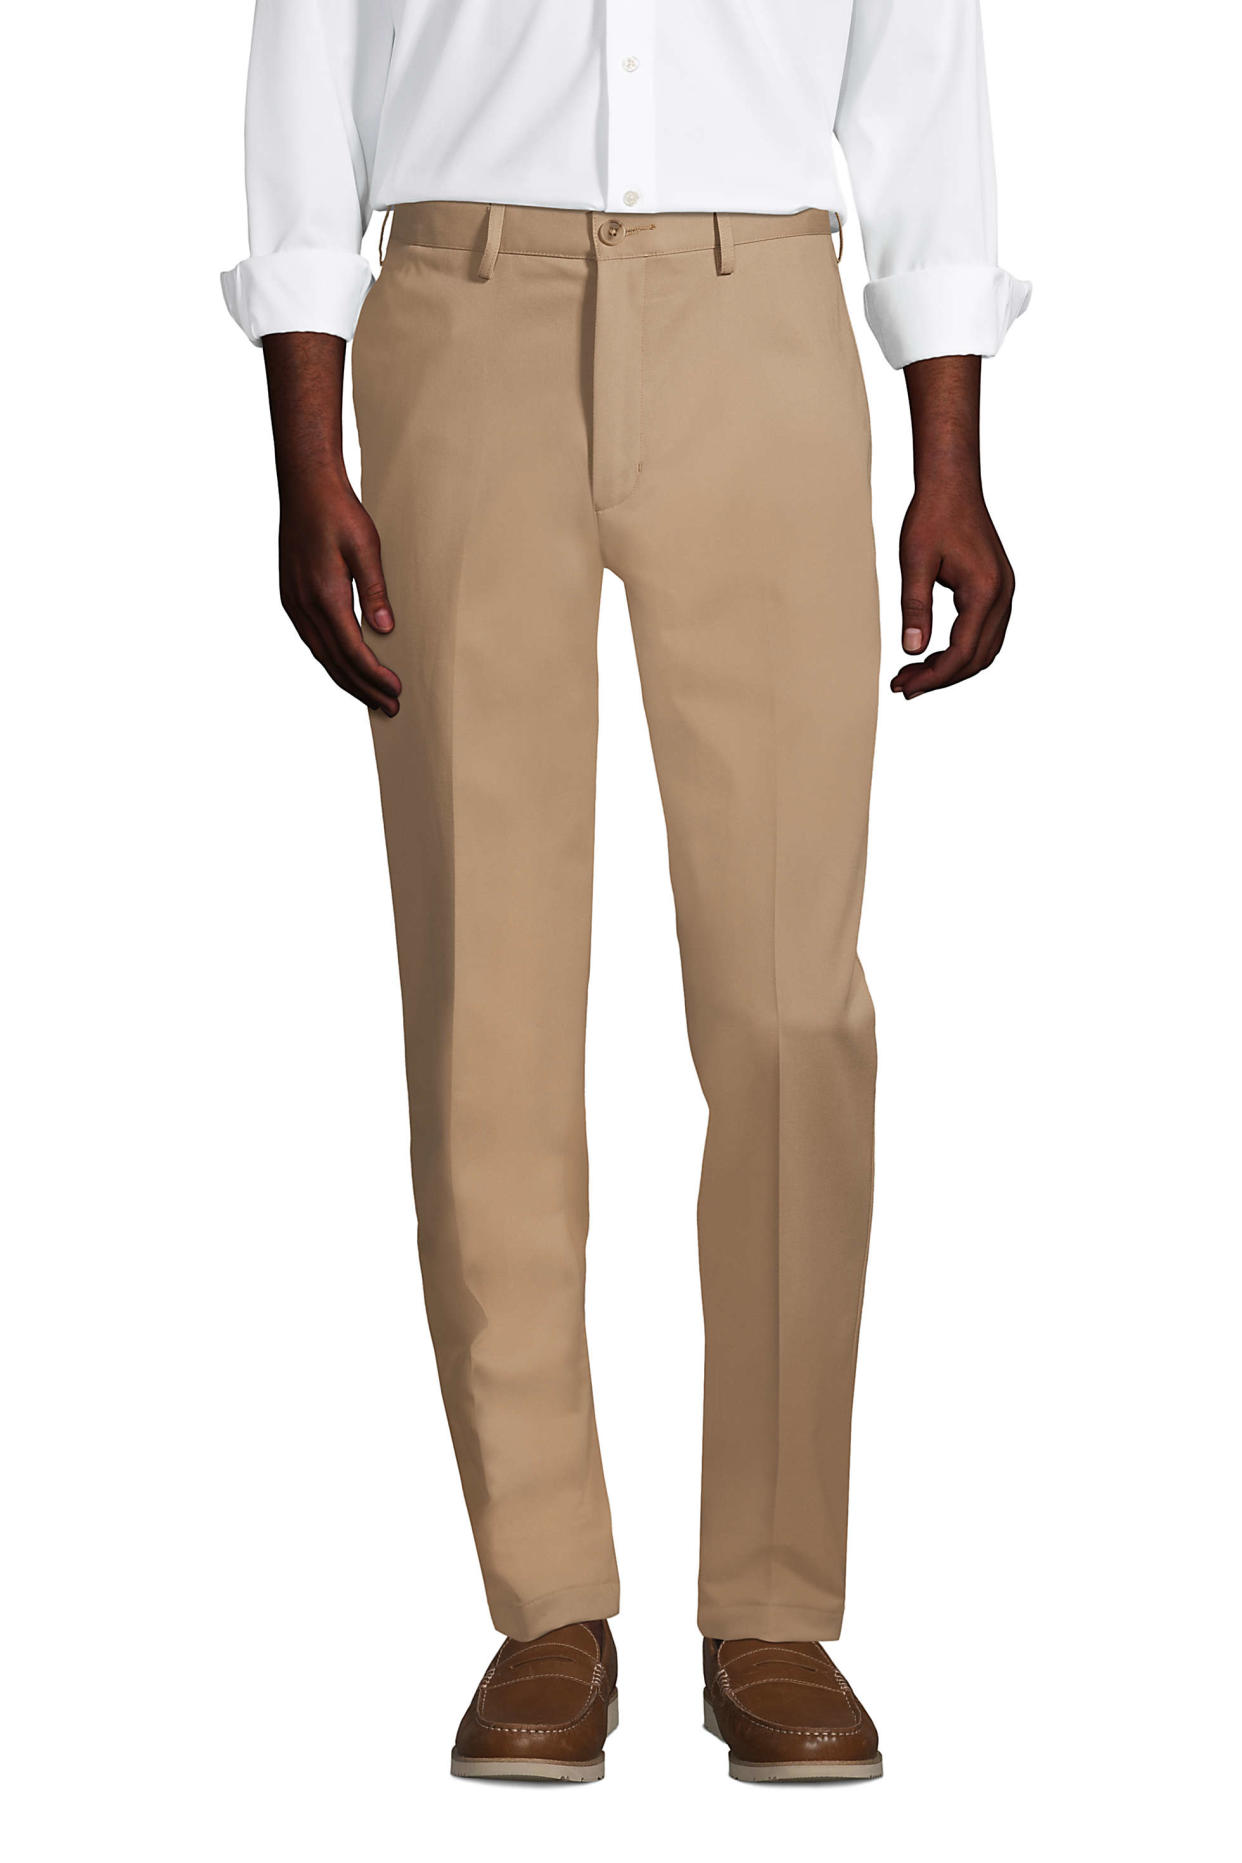 Land's End Traditional Fit No Iron Chino Pants